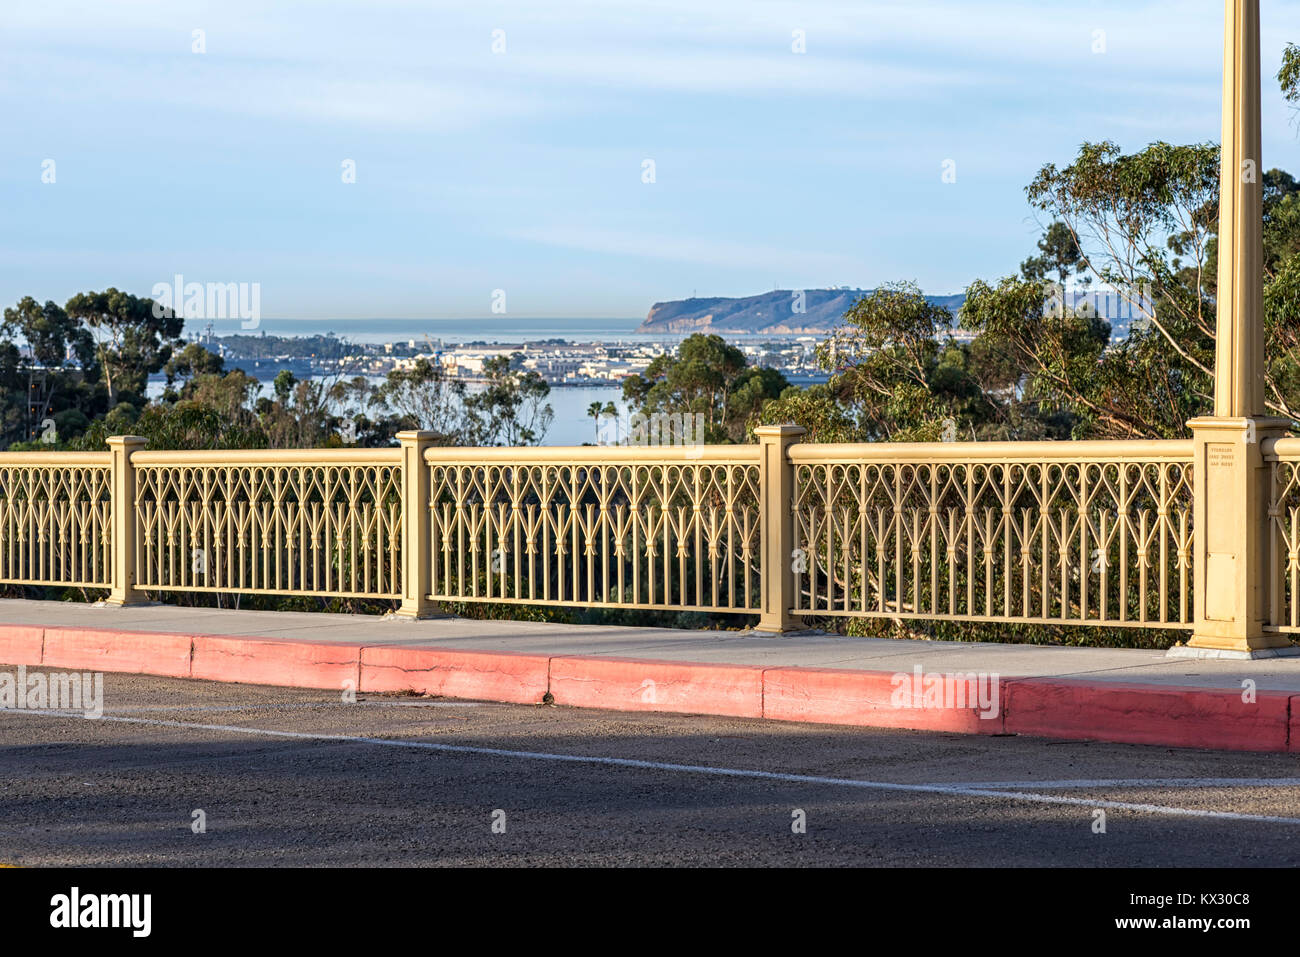 View of the First Avenue Bridge in downtown San Diego, California. Stock Photo